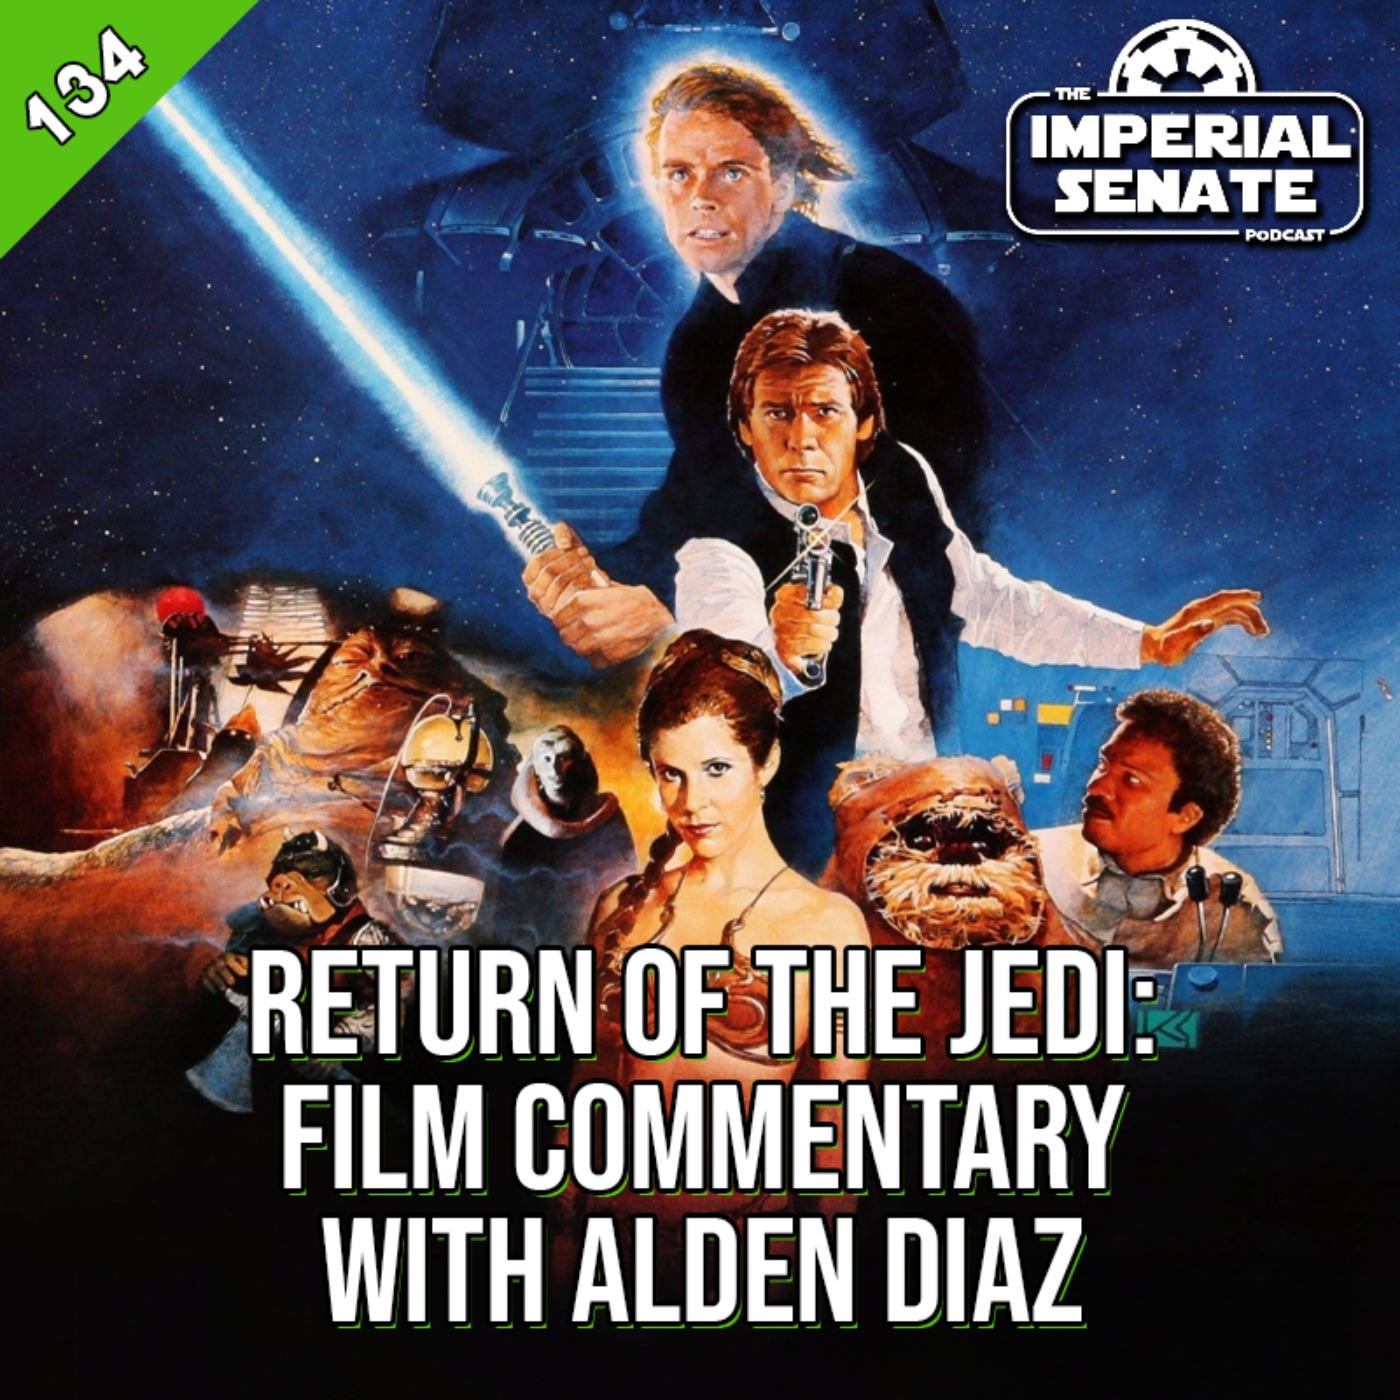 The Imperial Senate Podcast: Episode 134 - Return of the Jedi: Film Commentary (With Alden Diaz)